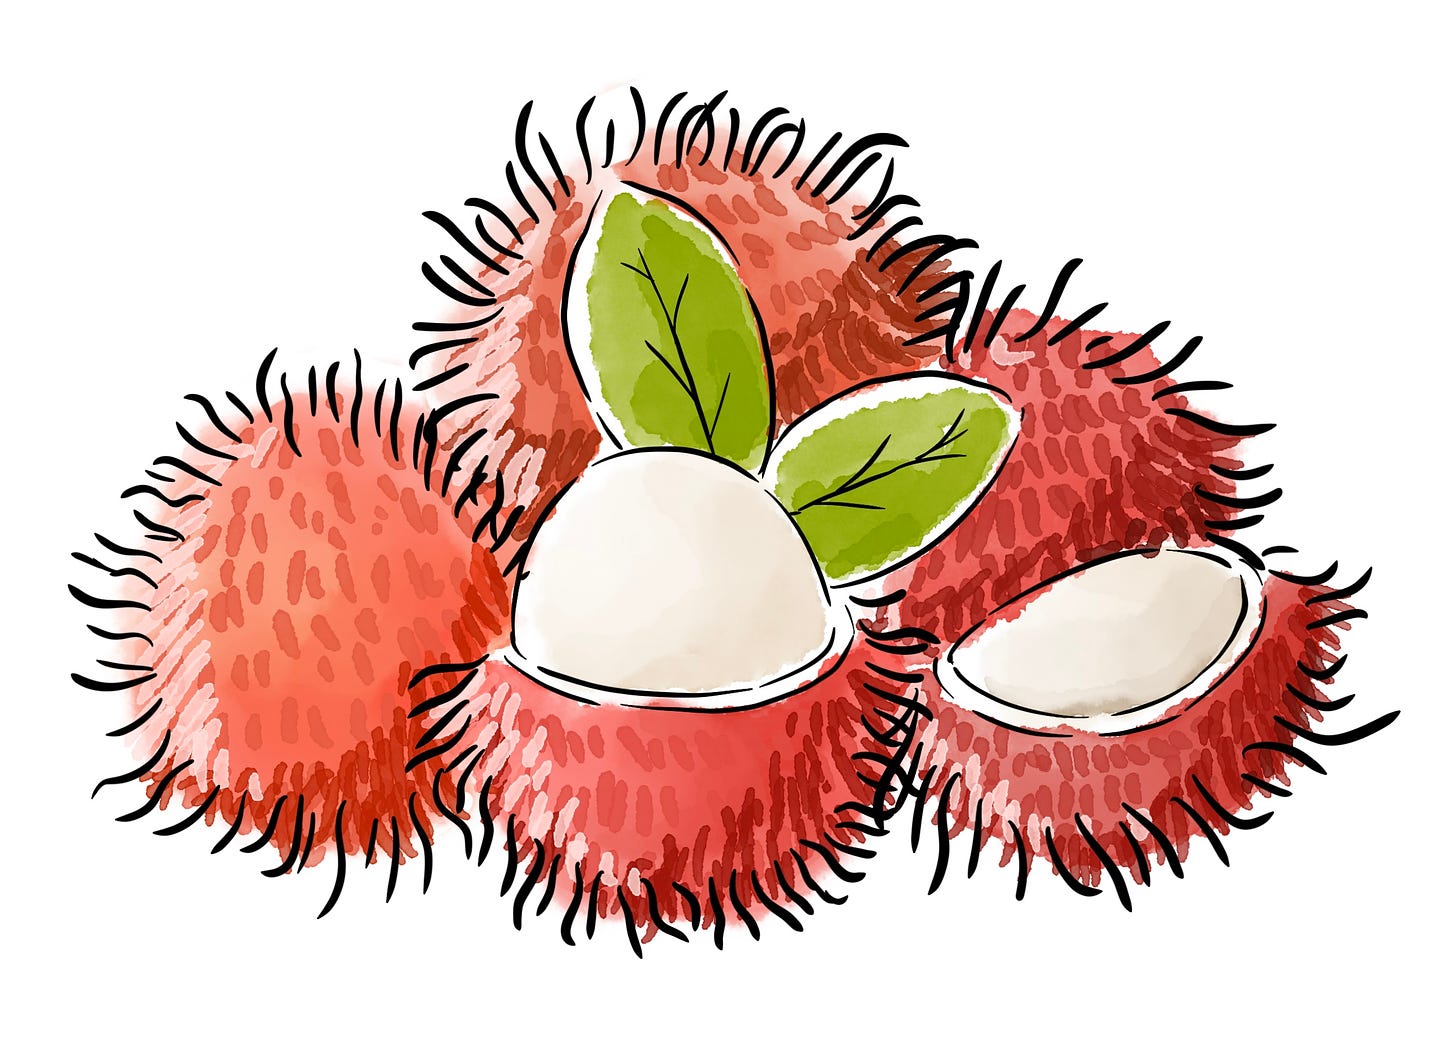 Color illustration of pile of rambutans